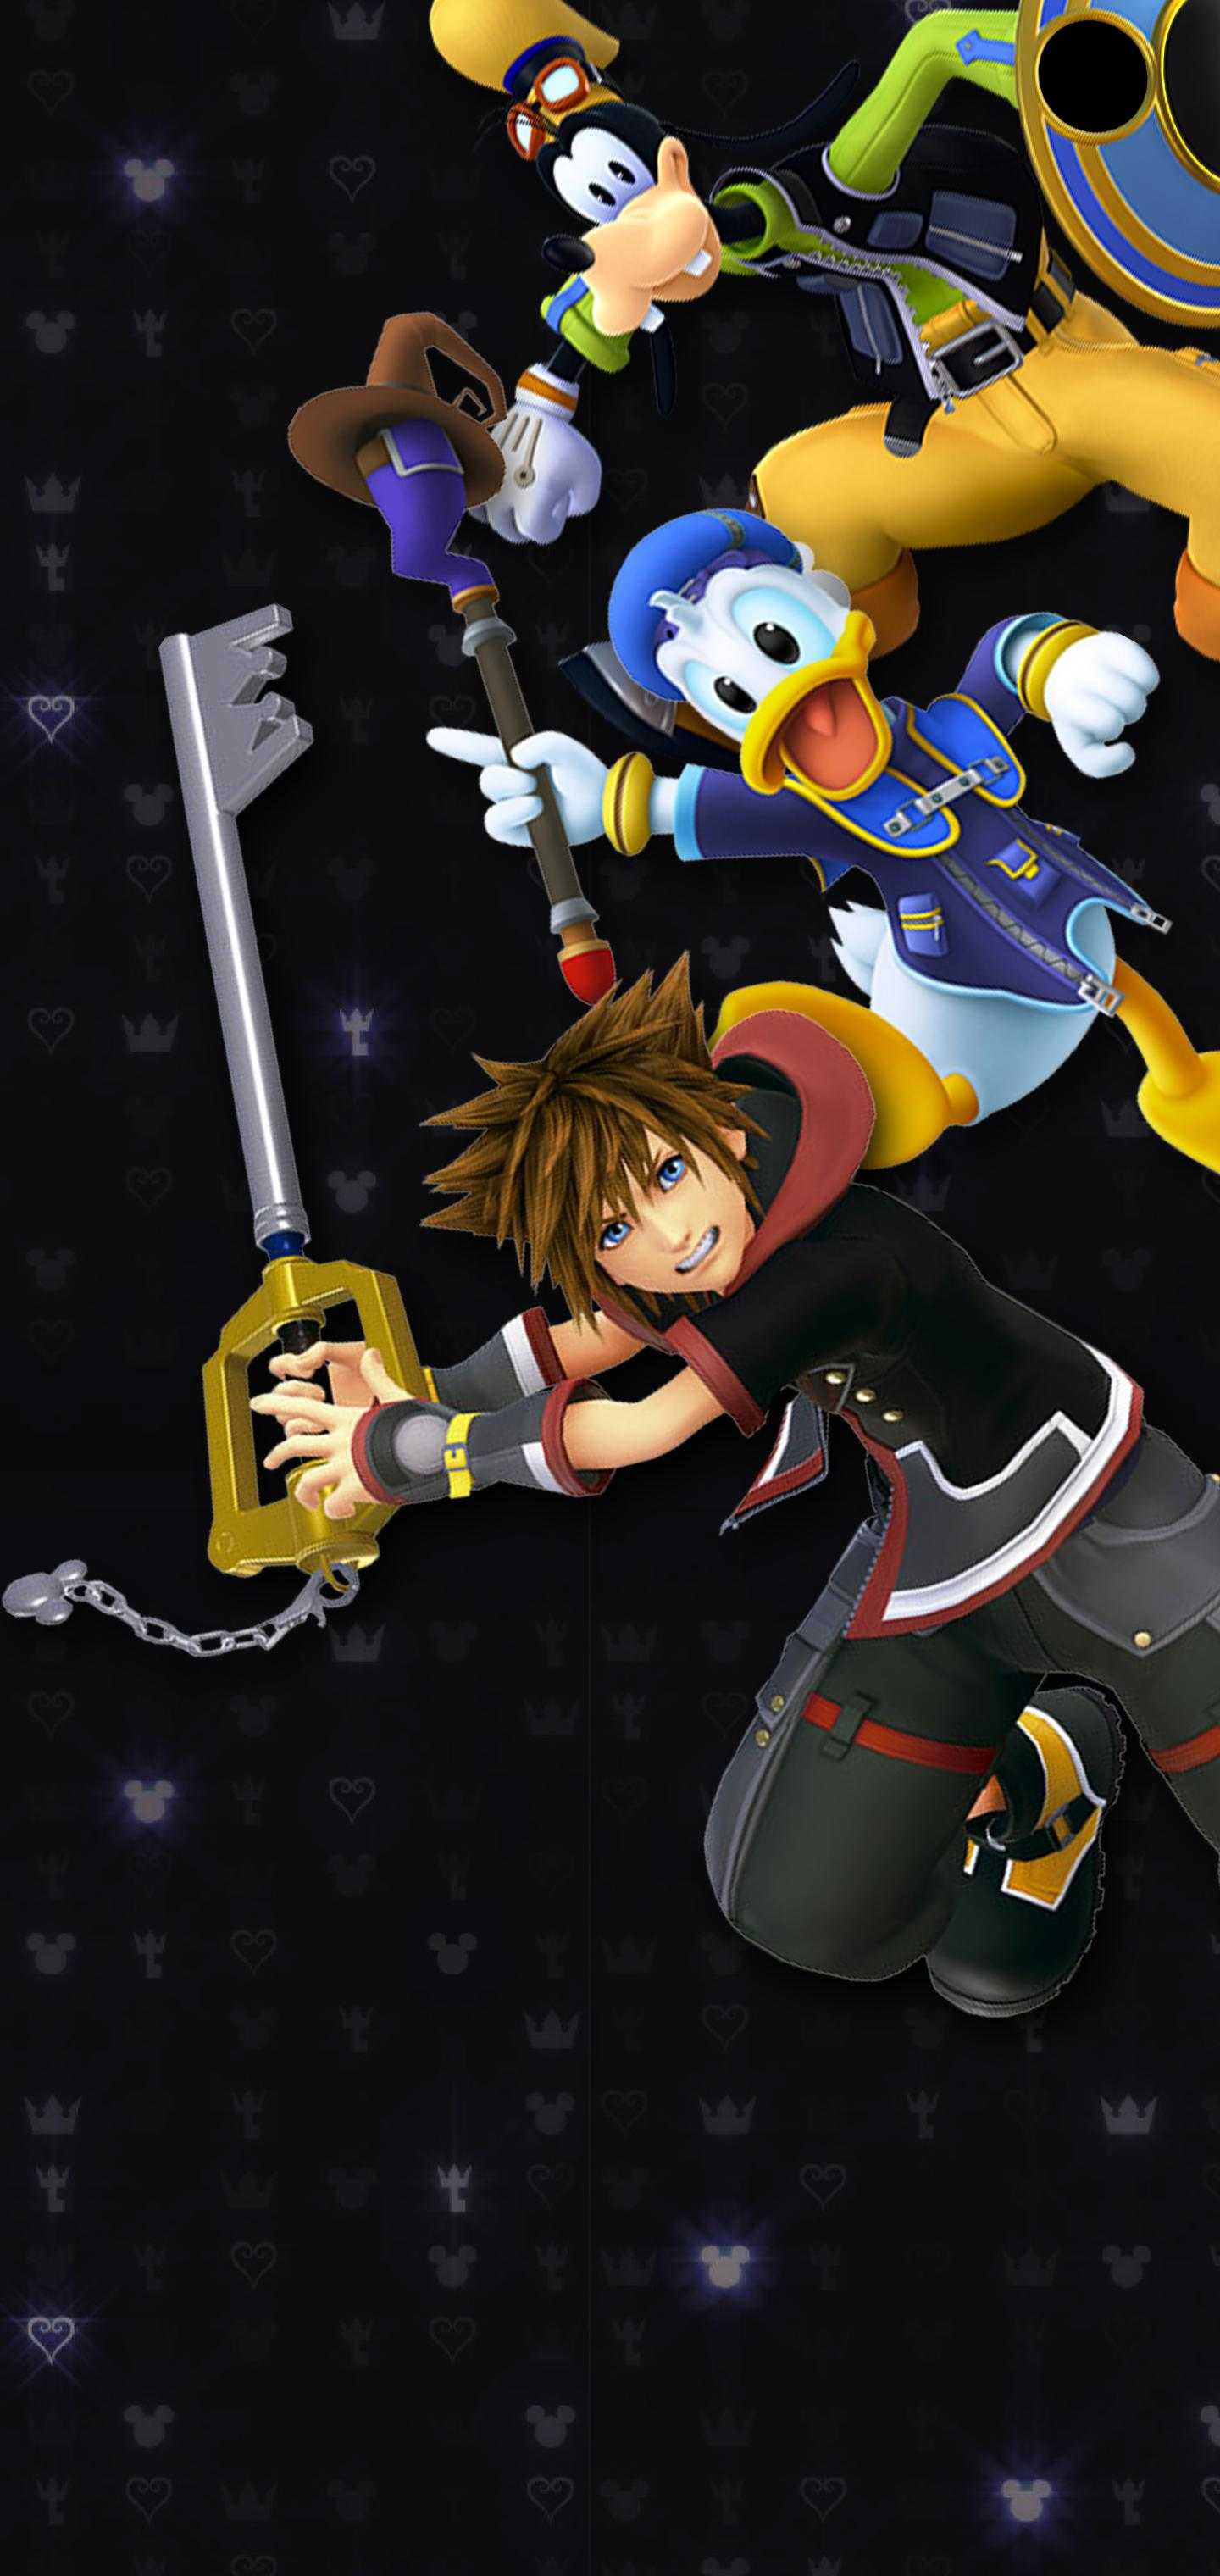 Kingdom Hearts Wallpaper Android Kolpaper Awesome Free Hd Wallpapers